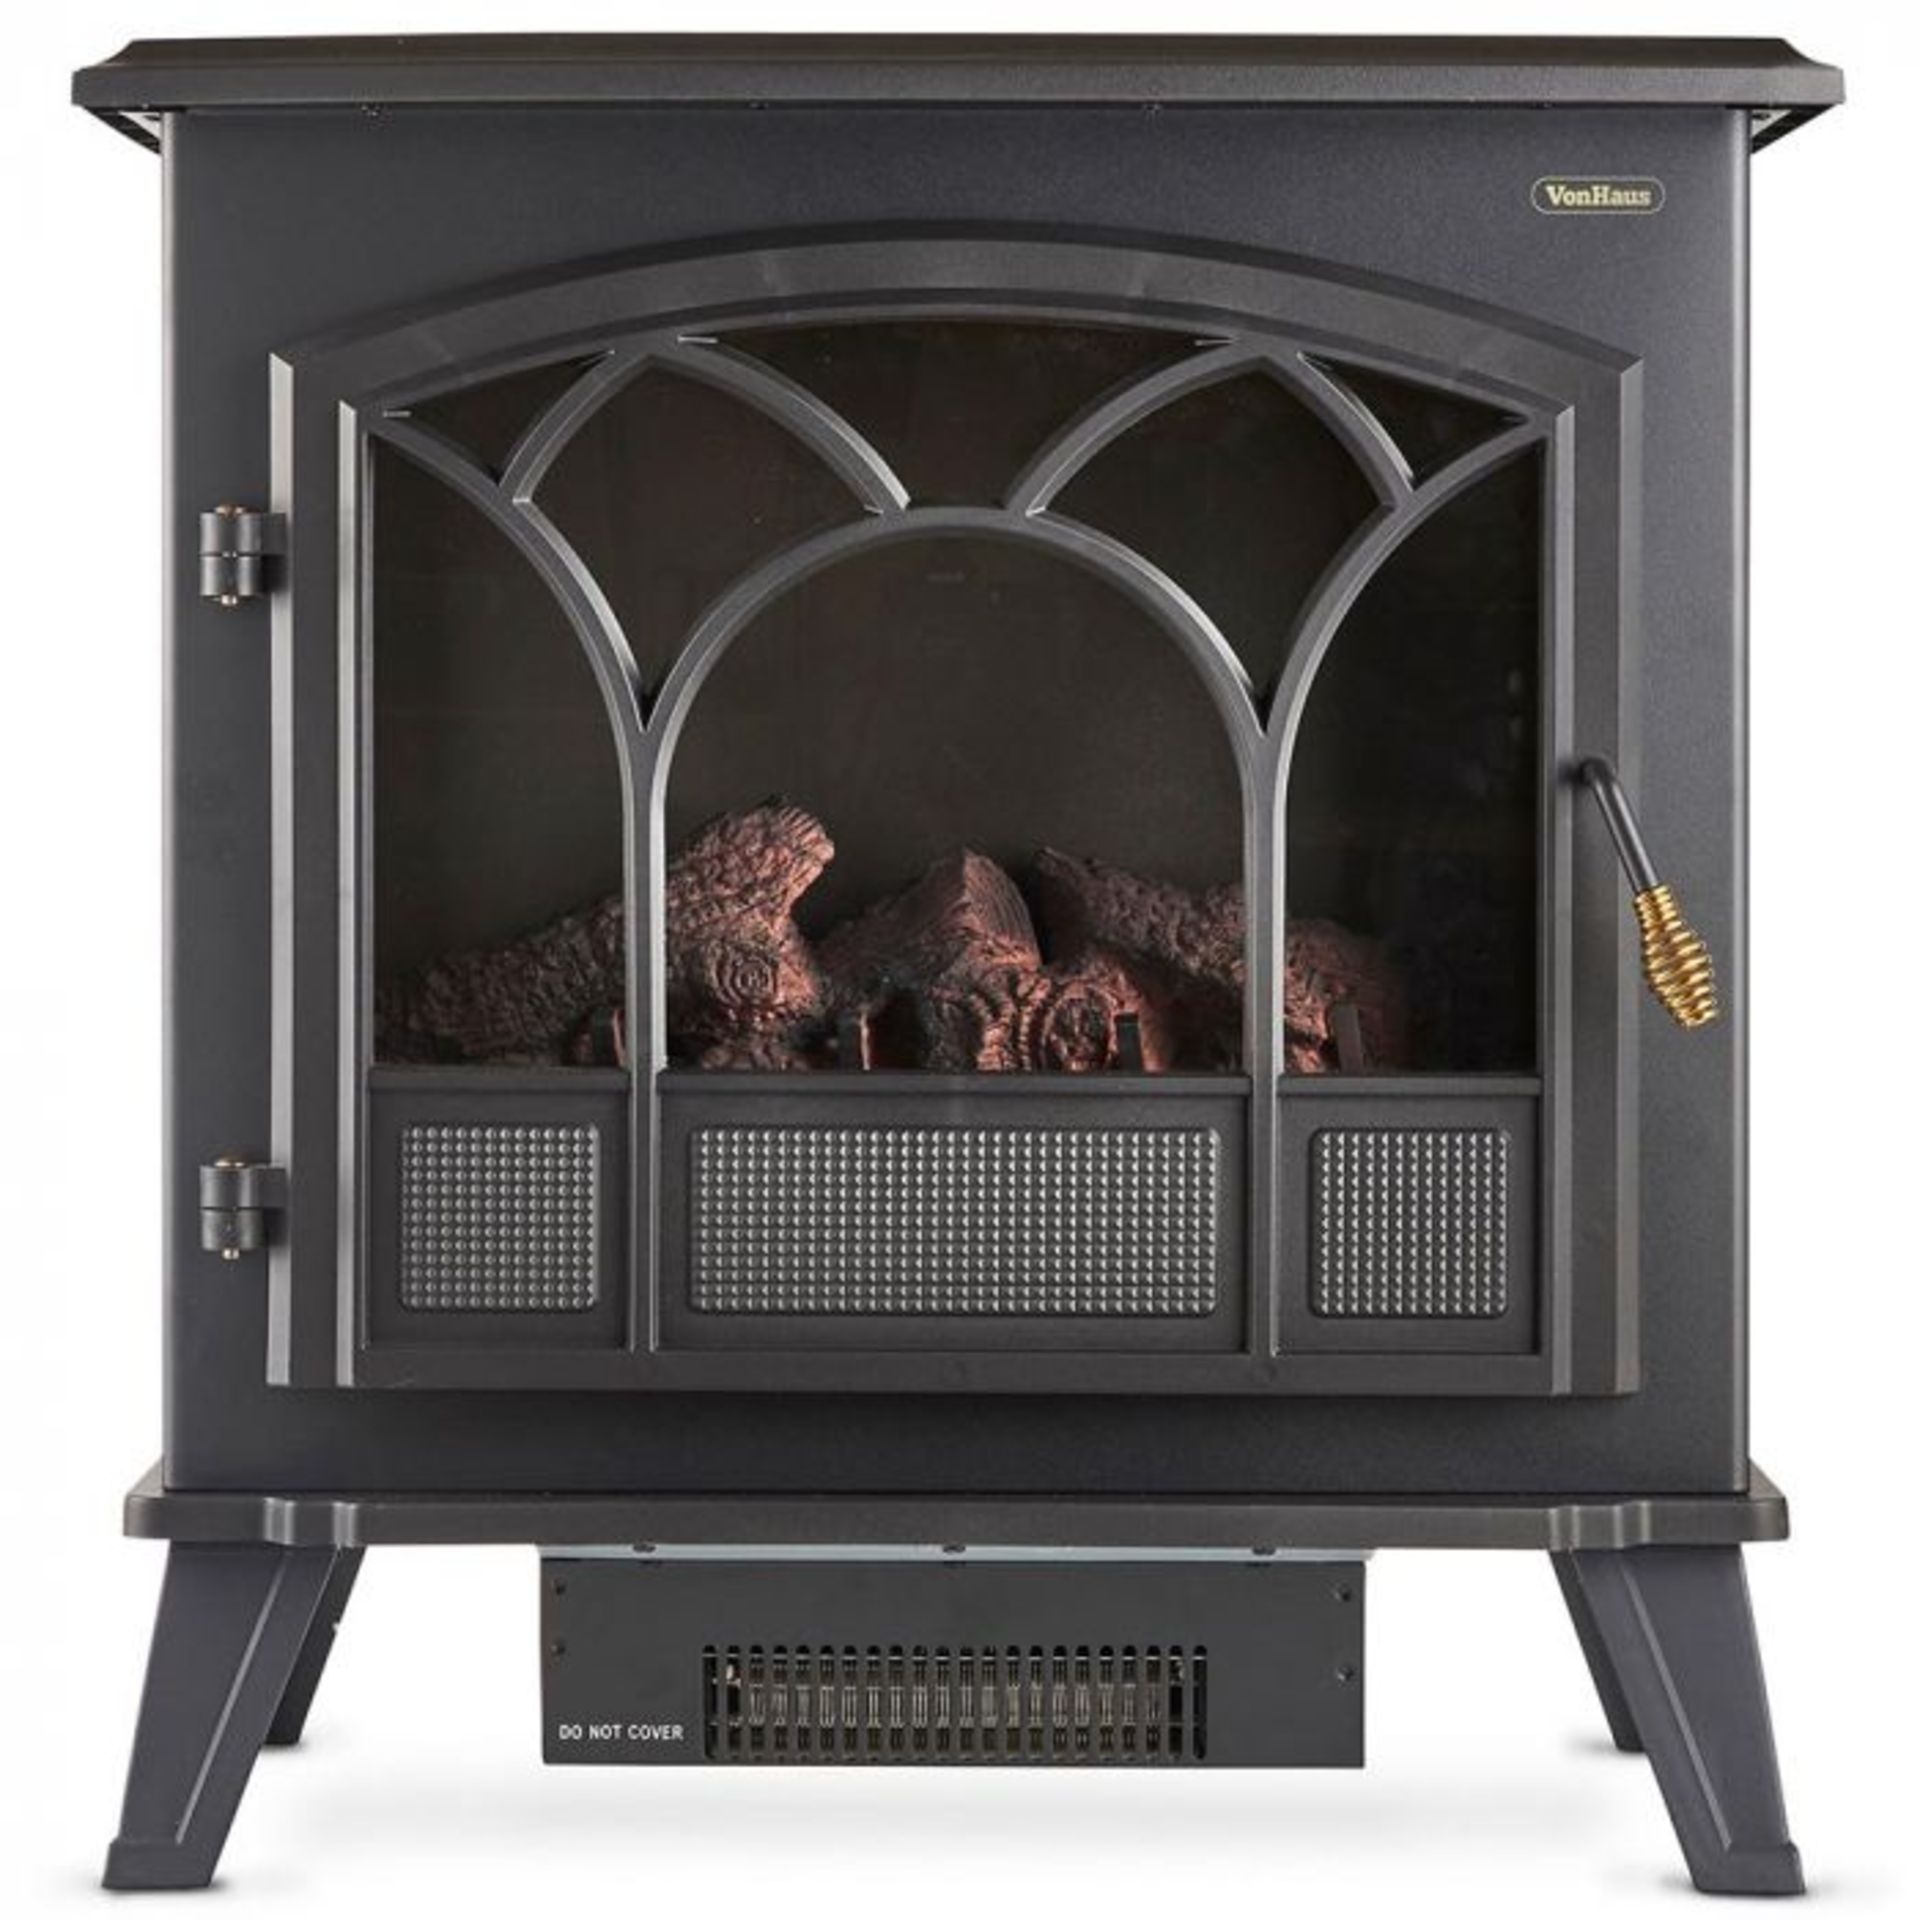 (S24) 1850W Large Black Stove Heater 1850W PORTABLE ELECTRIC STOVE HEATER – classically-desi... - Image 4 of 4